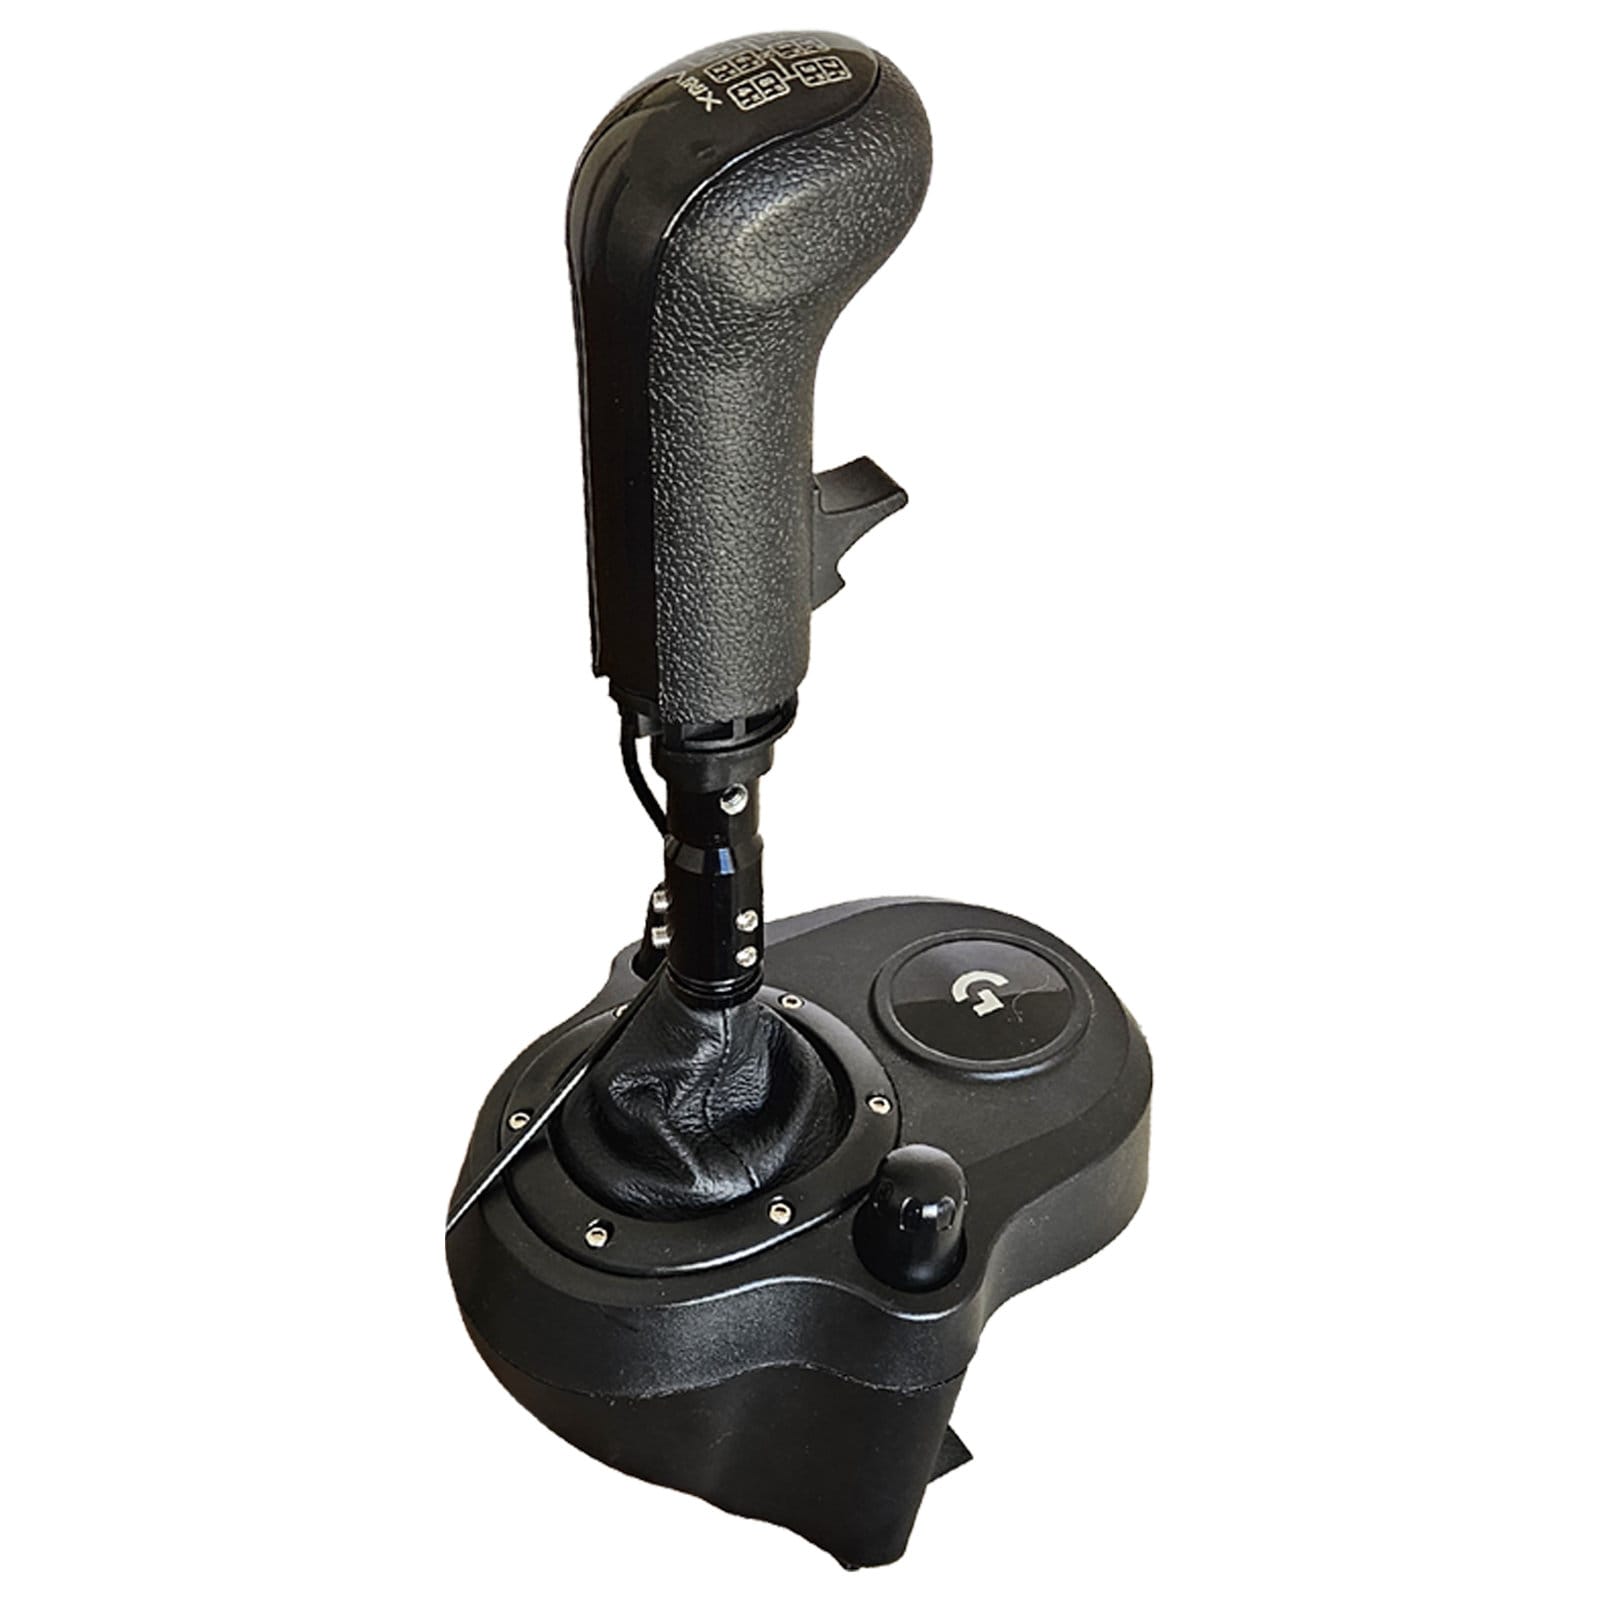 USB 18-speed Eaton Fulton Truck Shifter for Logitech, Thrustmaster, Fanatec  and Others 